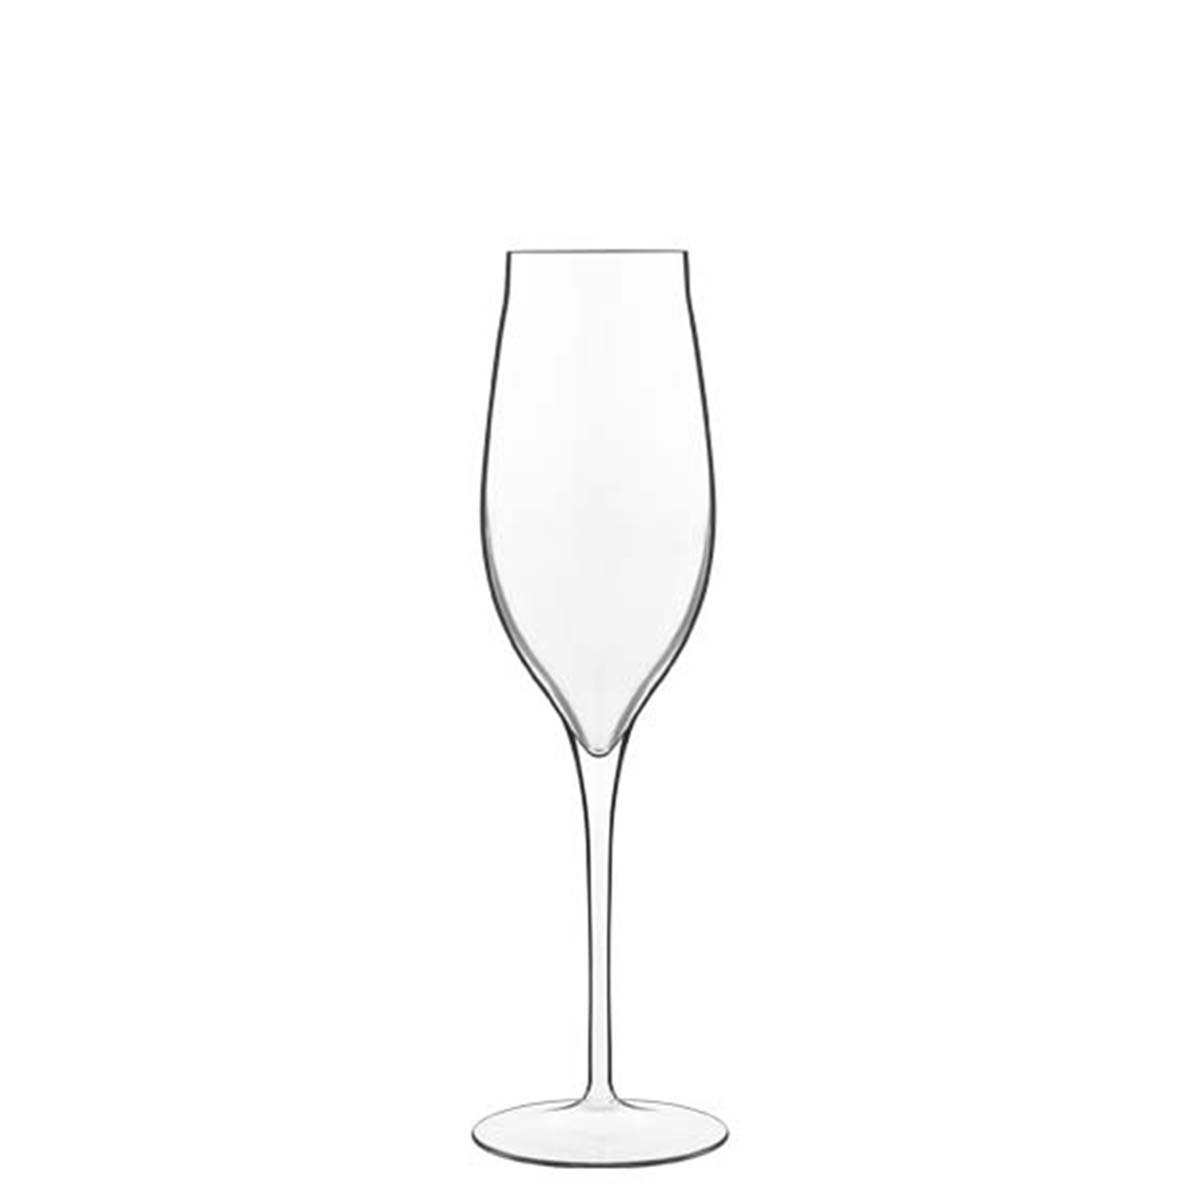 Champagne Flute - 200Ml, Vinea from Luigi Bormioli. Fine Rim, Dishwasher Safe and sold in boxes of 6. Hospitality quality at wholesale price with The Flying Fork! 